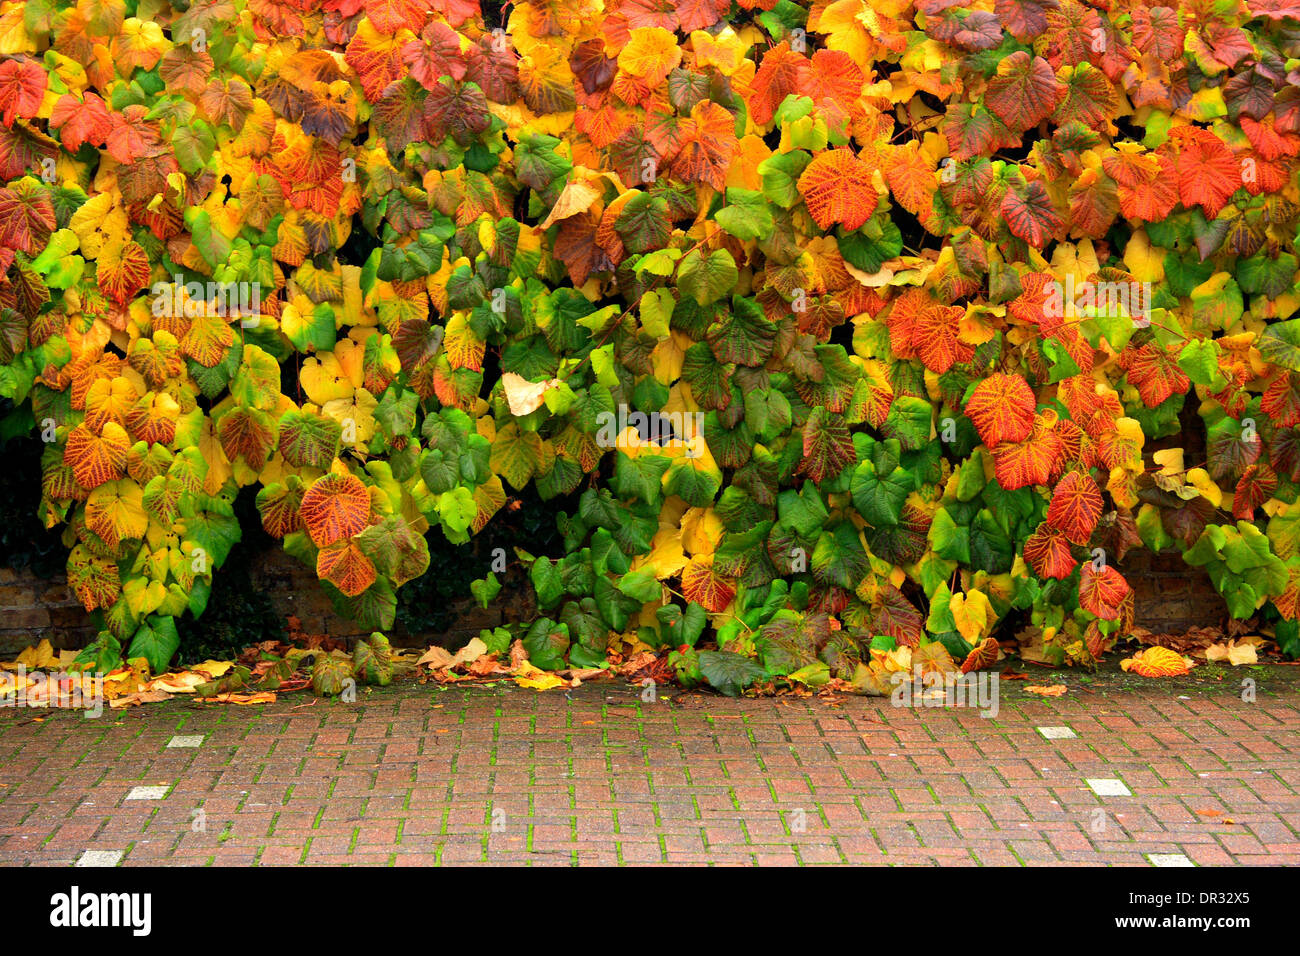 Autumnal leaves in an urban car park Stock Photo